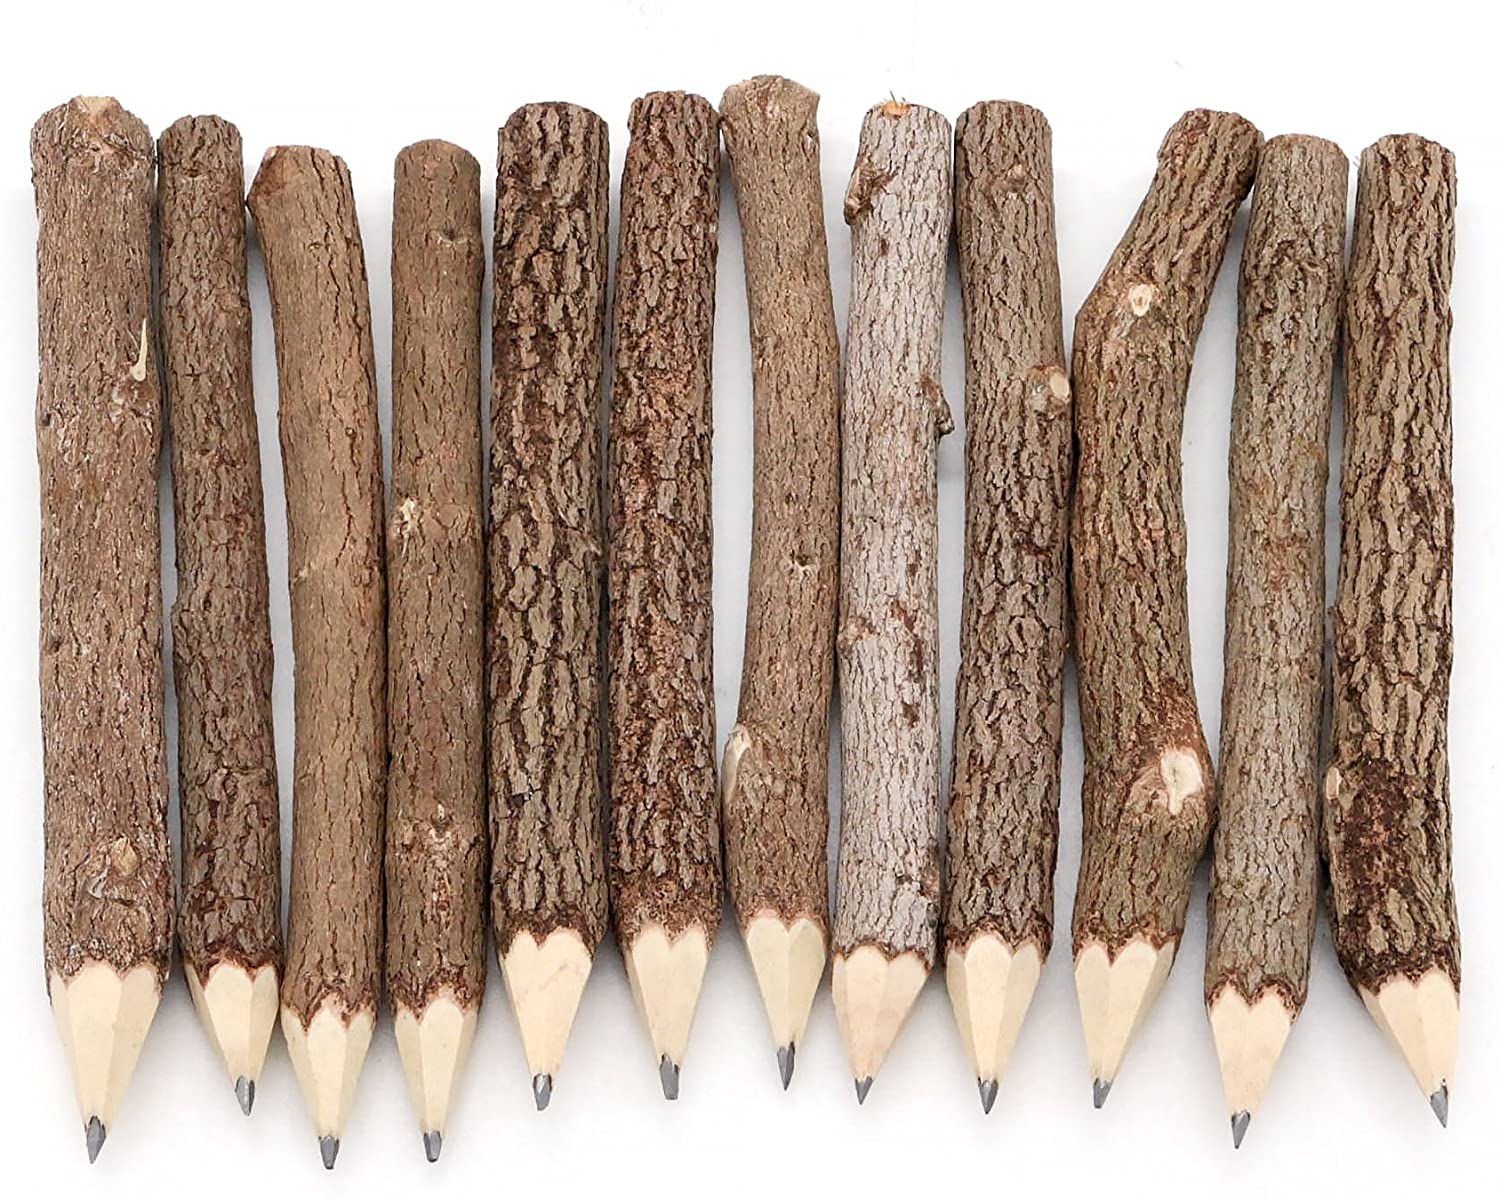  Pencil Wood Favors of Graphite Wooden Tree Rustic Twig Pencils Unique Birch of 12 Camping Lumberjack Decorations Party Supplies Novelty Gifts as a Natural Pencil Gifts for Kids in Classroom